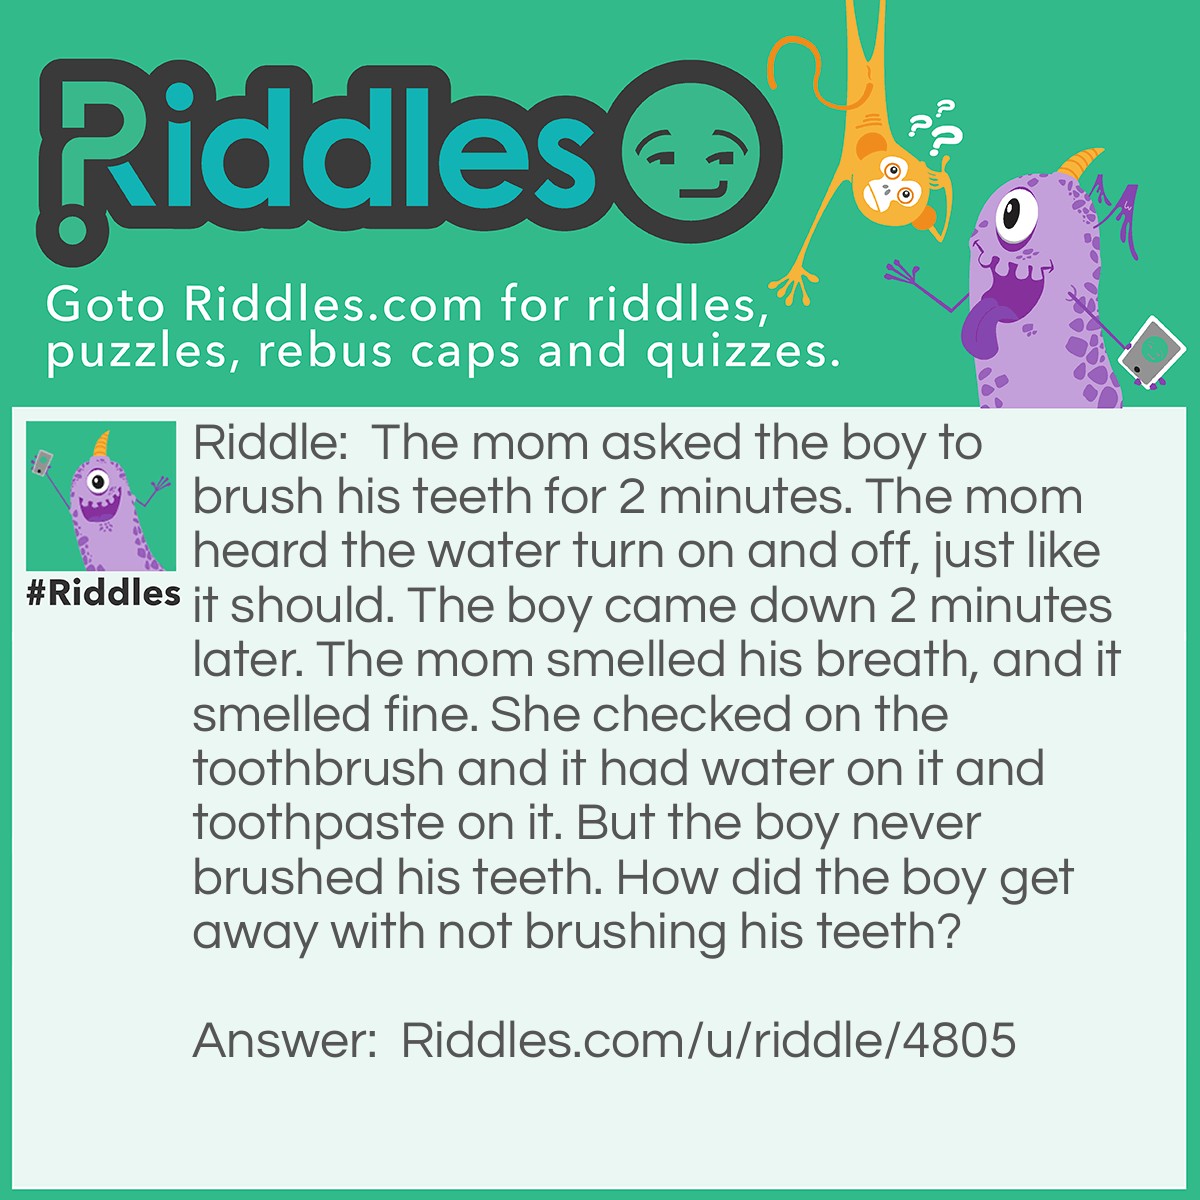 Riddle: The mom asked the boy to brush his teeth for 2 minutes. The mom heard the water turn on and off, just like it should. The boy came down 2 minutes later. The mom smelled his breath, and it smelled fine. She checked on the toothbrush and it had water on it and toothpaste on it. But the boy never brushed his teeth. How did the boy get away with not brushing his teeth? Answer: The boy put toothpaste on the brush and put water on it. Next, he turned the sink down to seem like it is off. He used the water to scrub off the toothpaste so the brush was wet and had a little bit of new toothpaste. Then, he put breath mints in his mouth and waited 2 minutes and then came down.